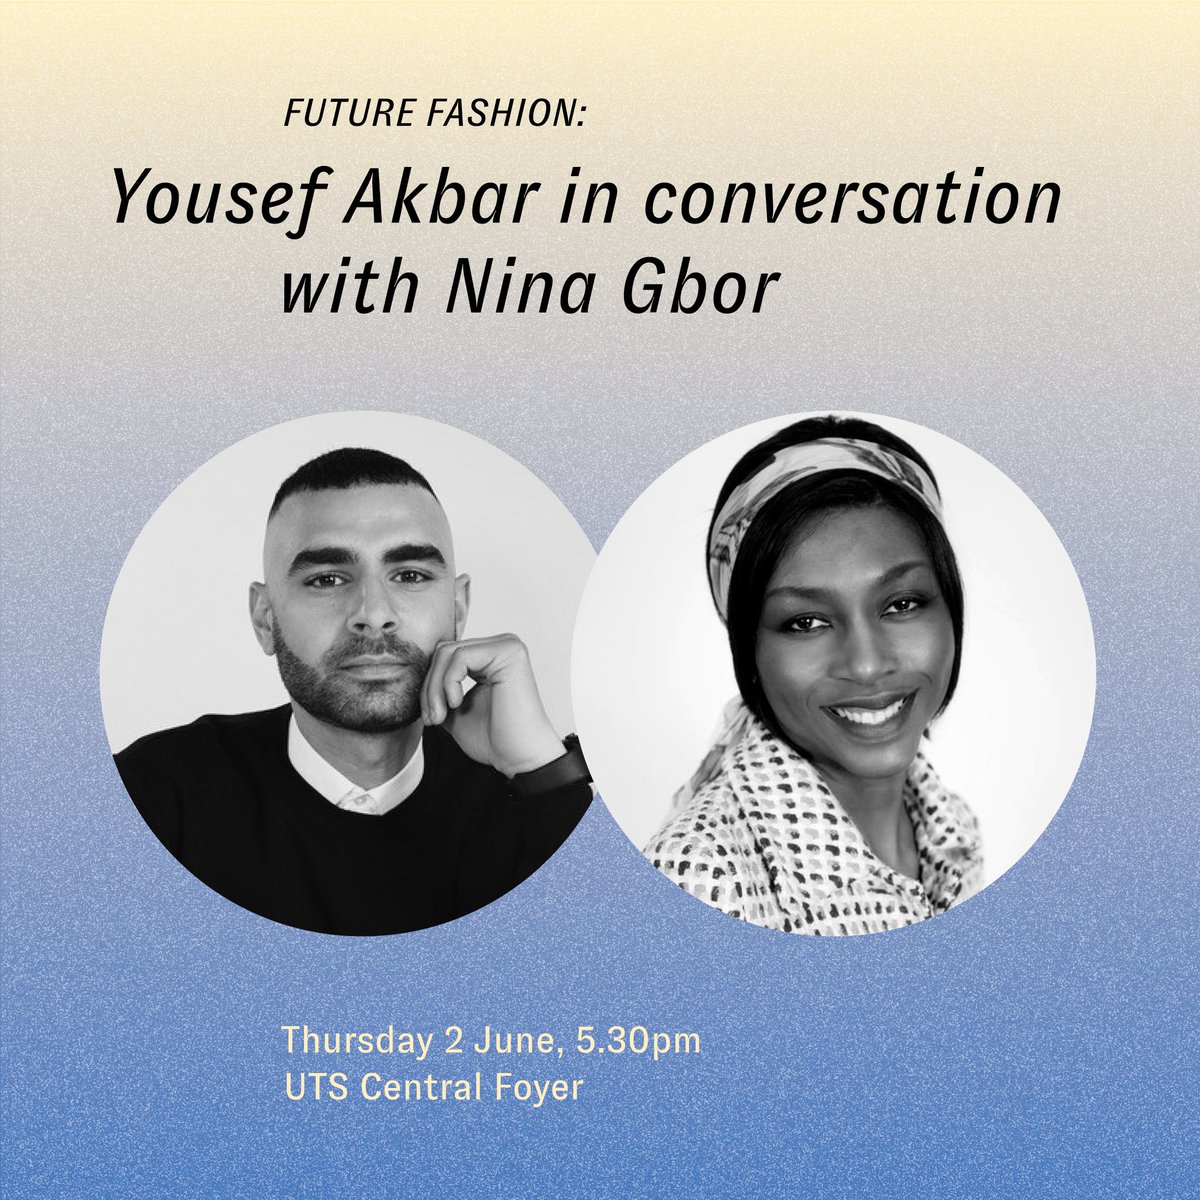 During @VividSydney, I'll be interviewing award-winning designer, @yousef_akbar on new digital tech and sustainable materials in fashion. At University Technology Sydney. 5:30 pm on June 2nd at UTS Central Building Foyer. Hope I see you there! 🦋 Tix: events.humanitix.com/future-fashion…